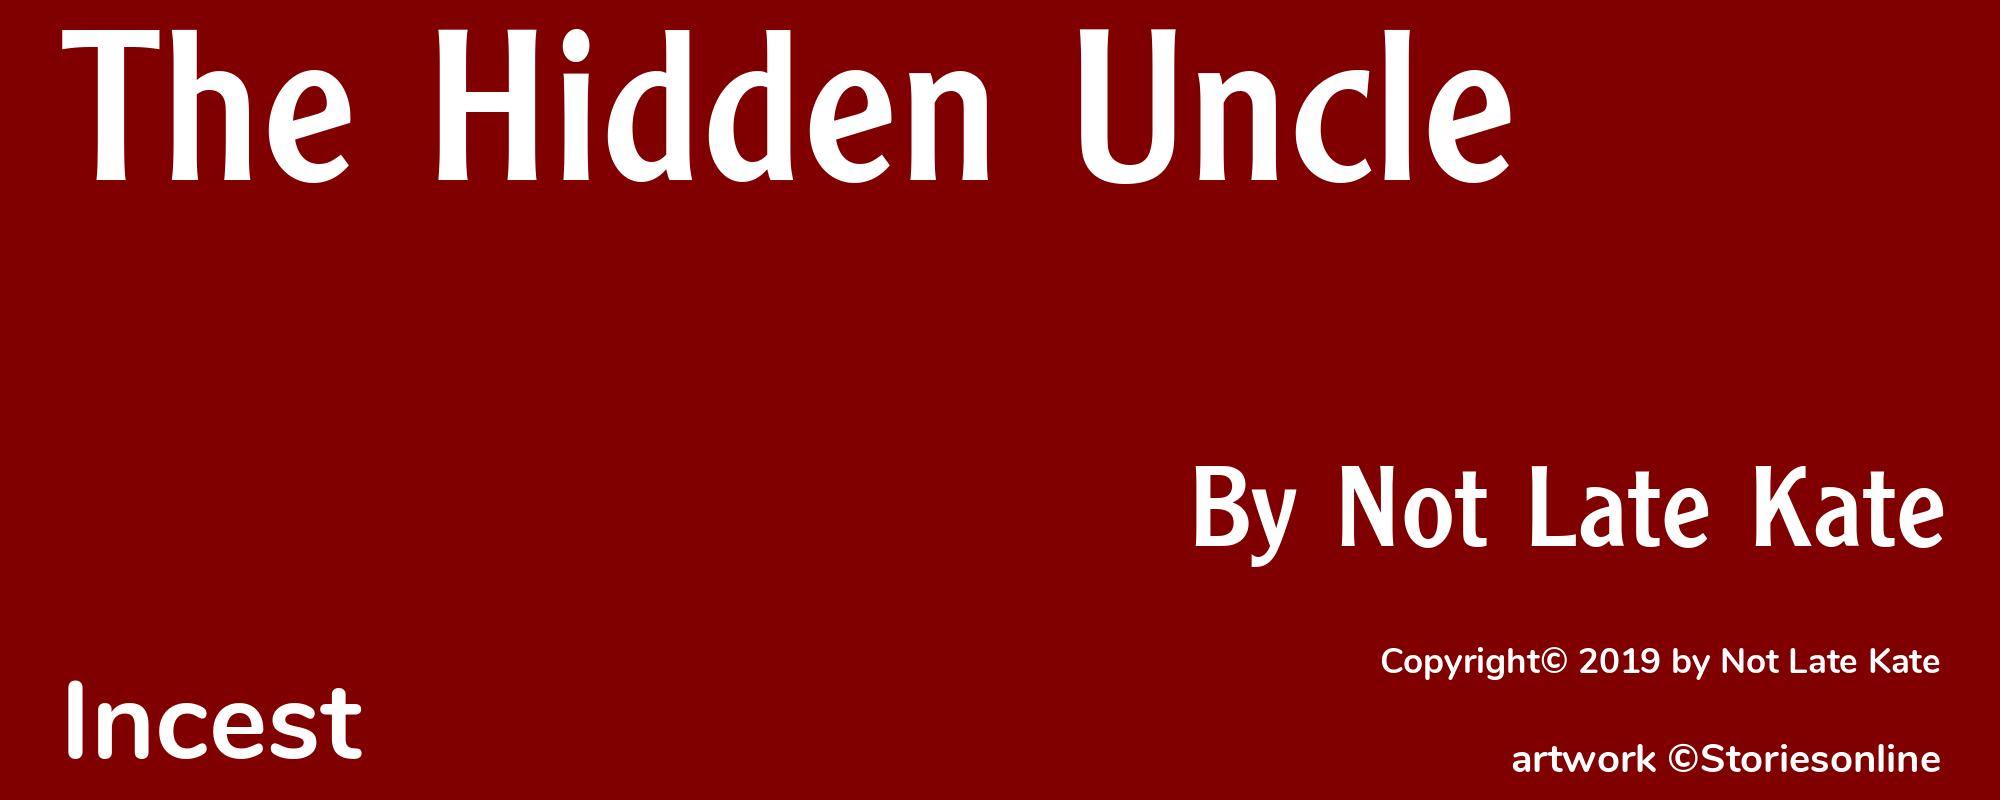 The Hidden Uncle - Cover